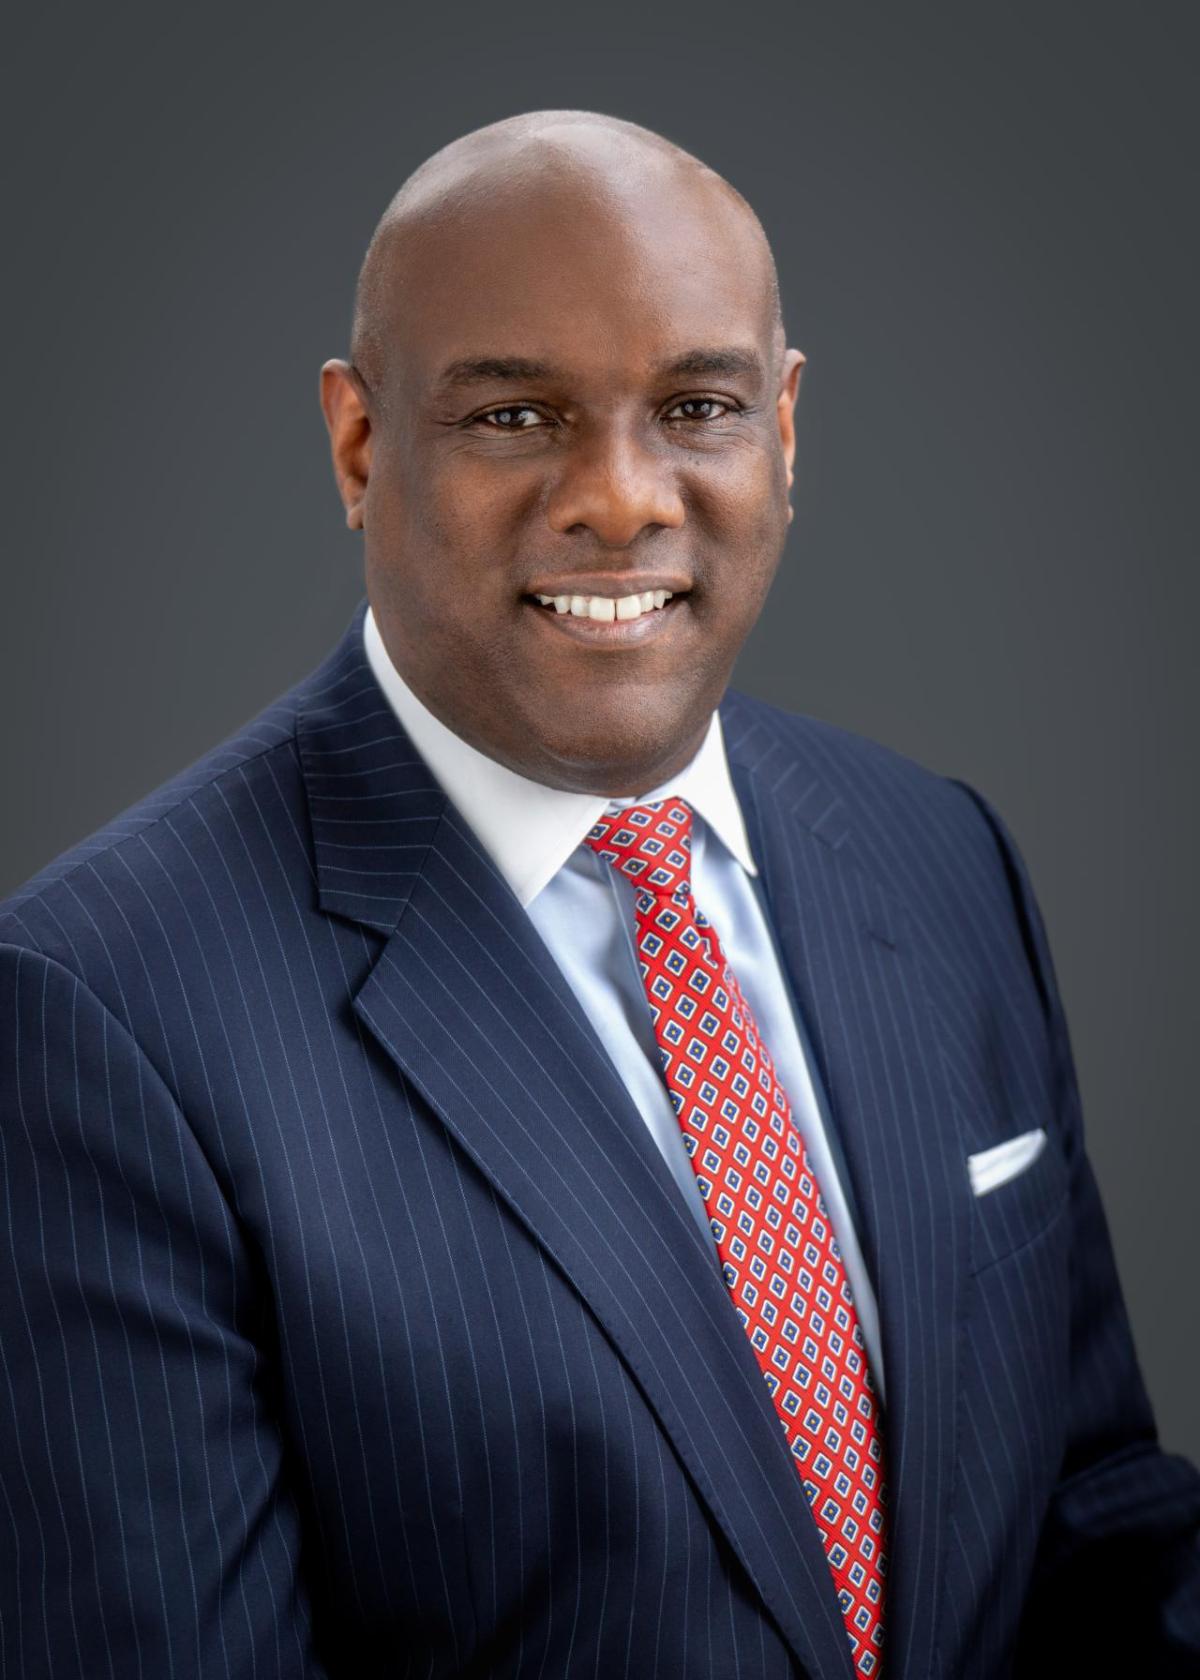 Richard Bynum, PNC's chief corporate responsibility officer